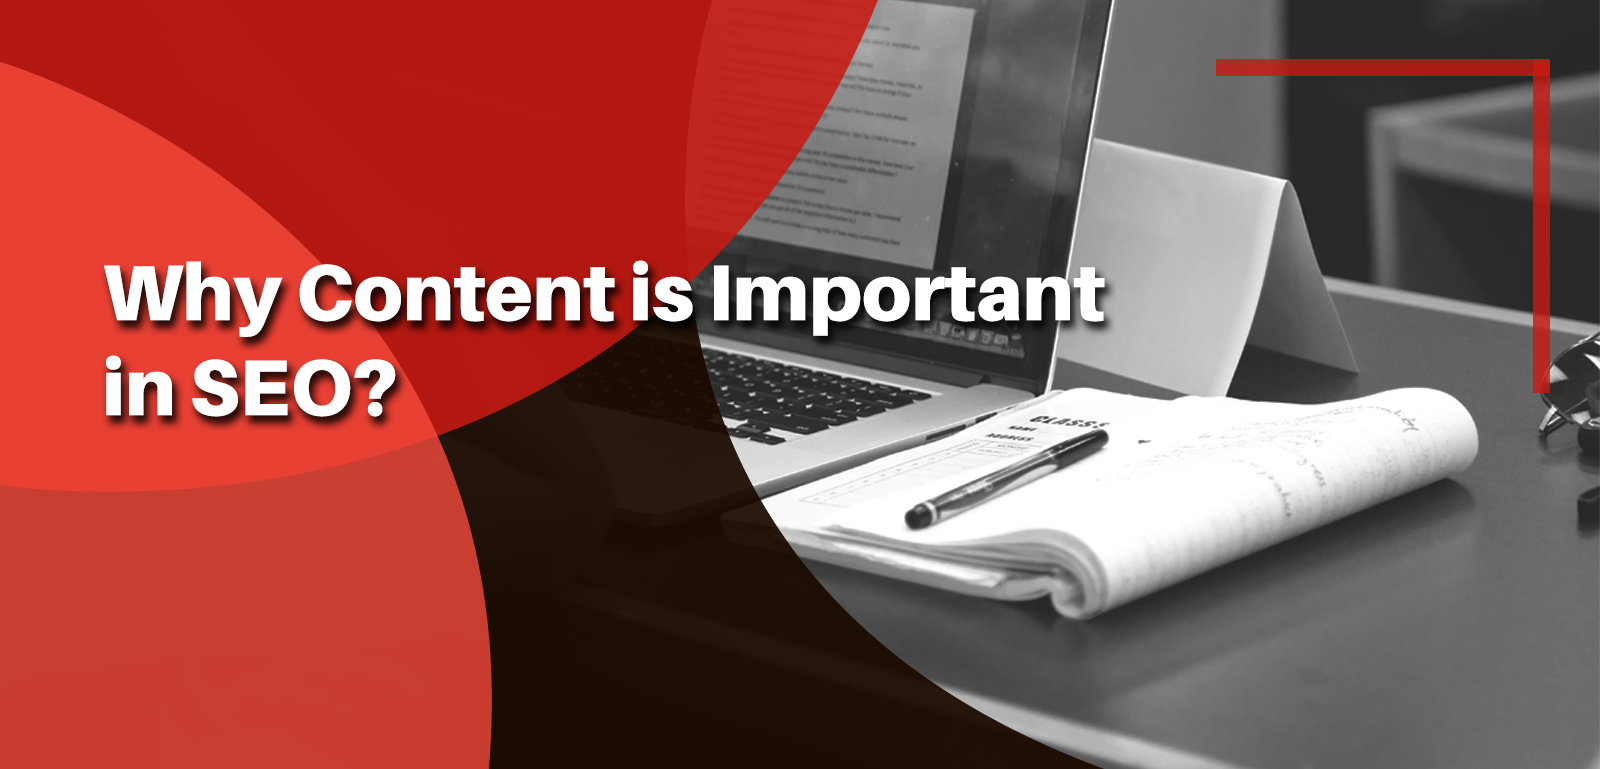 Why content is important in SEO